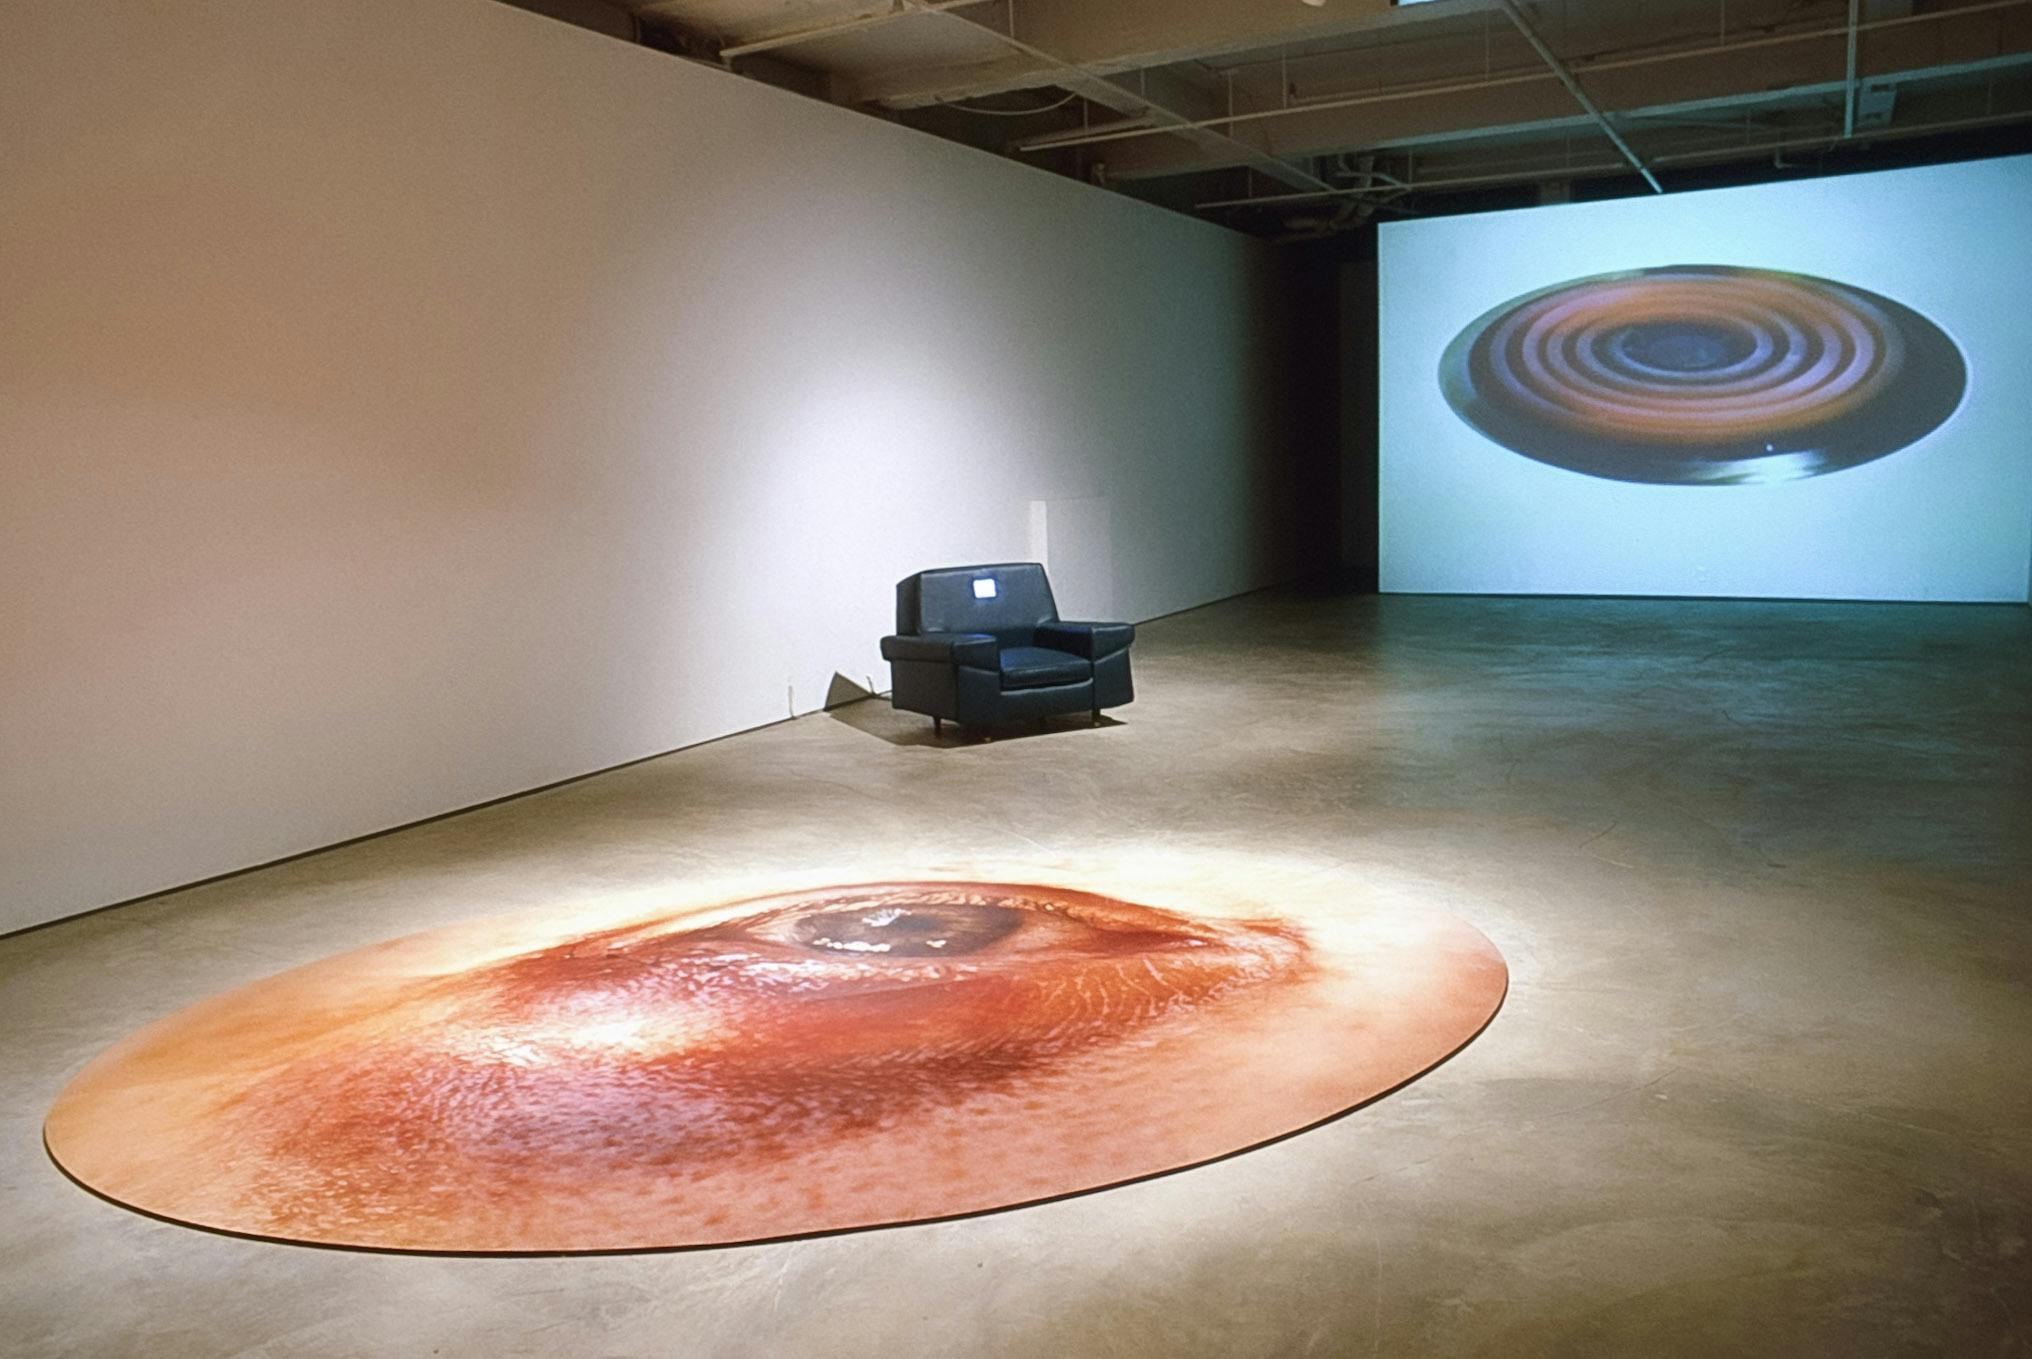 Three artworks are installed in the gallery. A projection of a coil stove is on the wall, foregrounded by a black rug chair on the floor. A circular-shaped photograph of an eye sits beside the rug. 